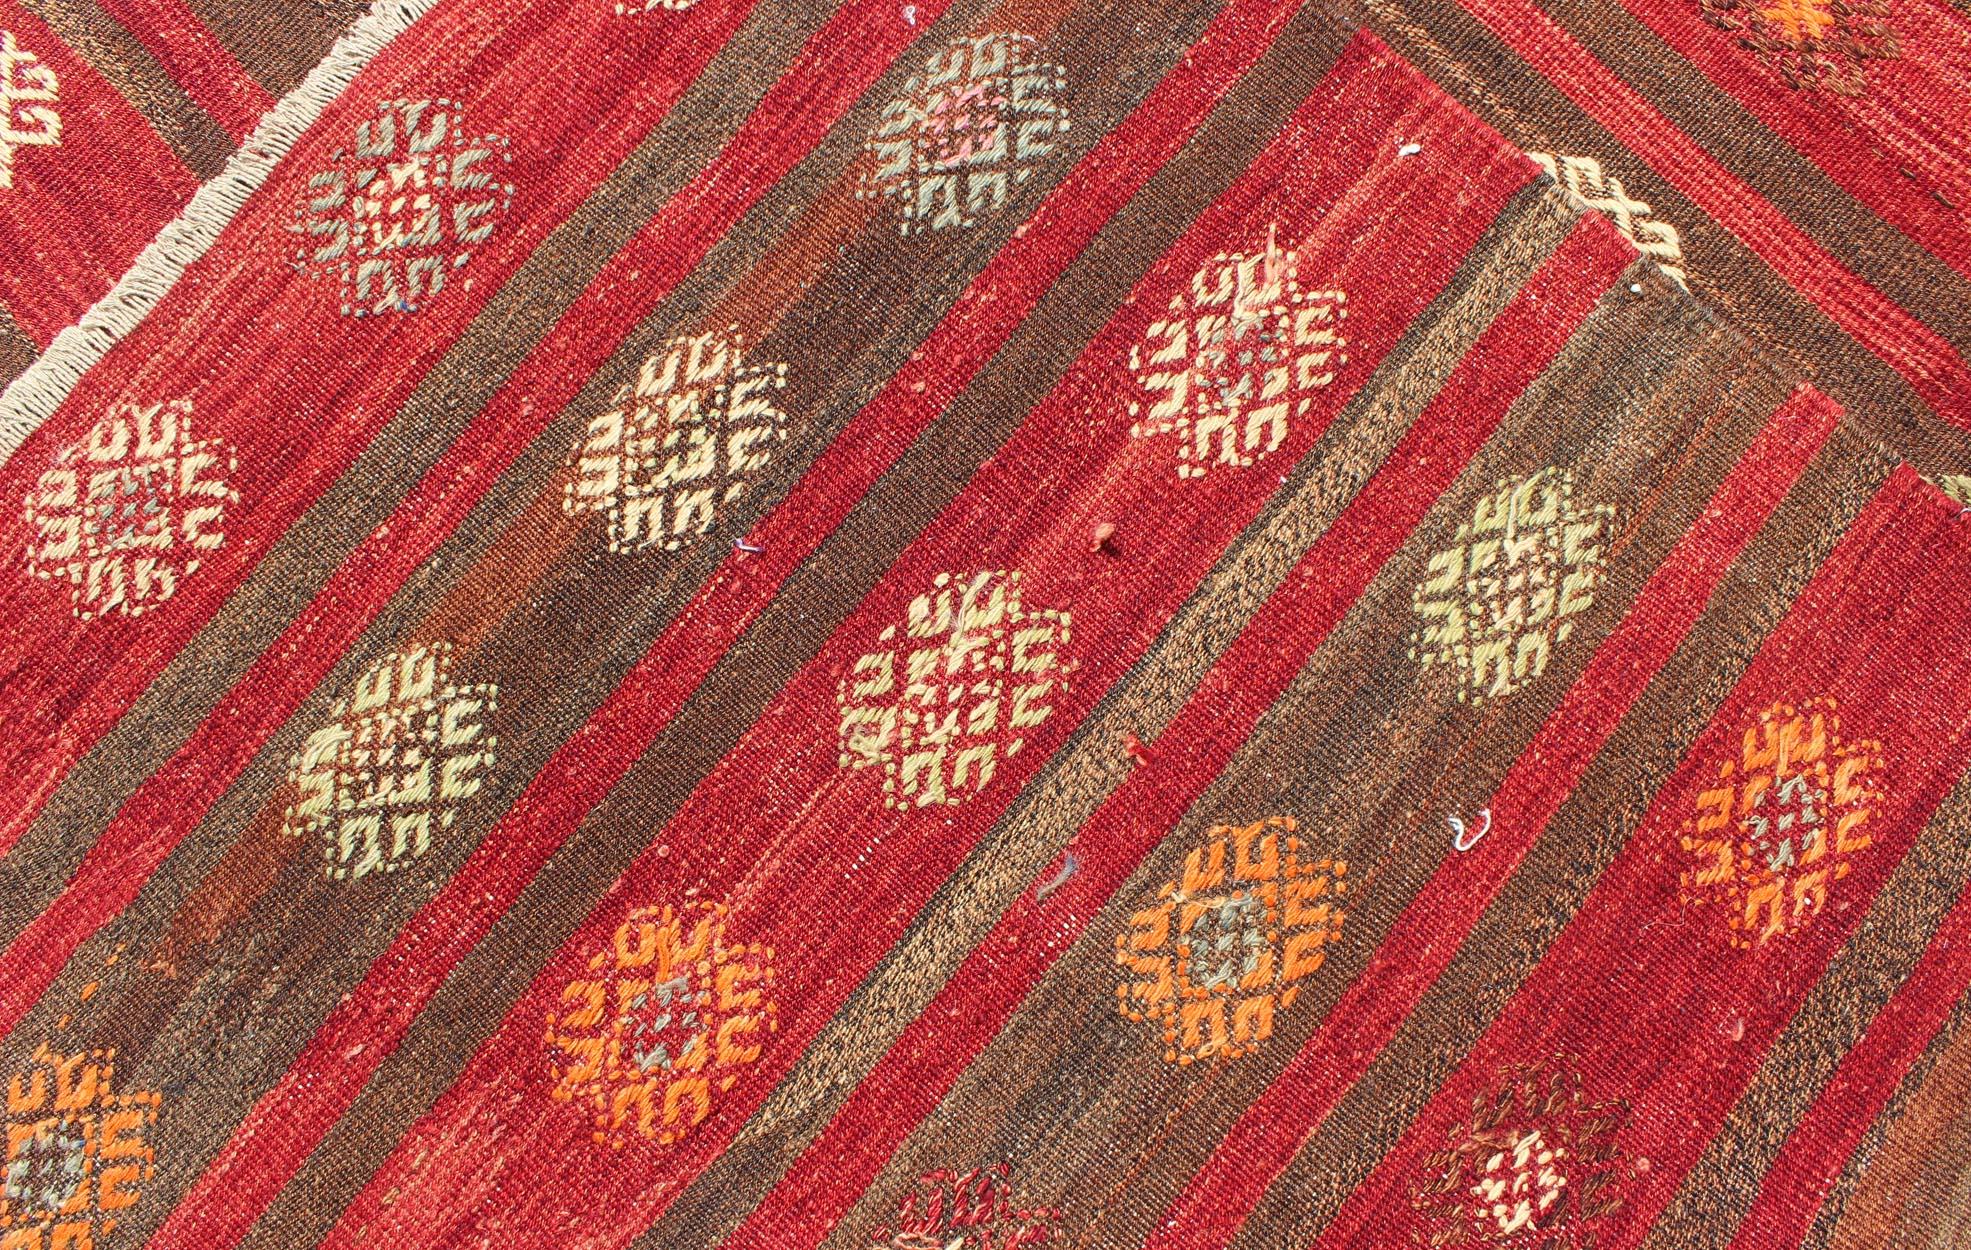 Hand-Woven Red and Brown Striped Turkish Hand Woven Kilim Rug with Geometric Shapes For Sale